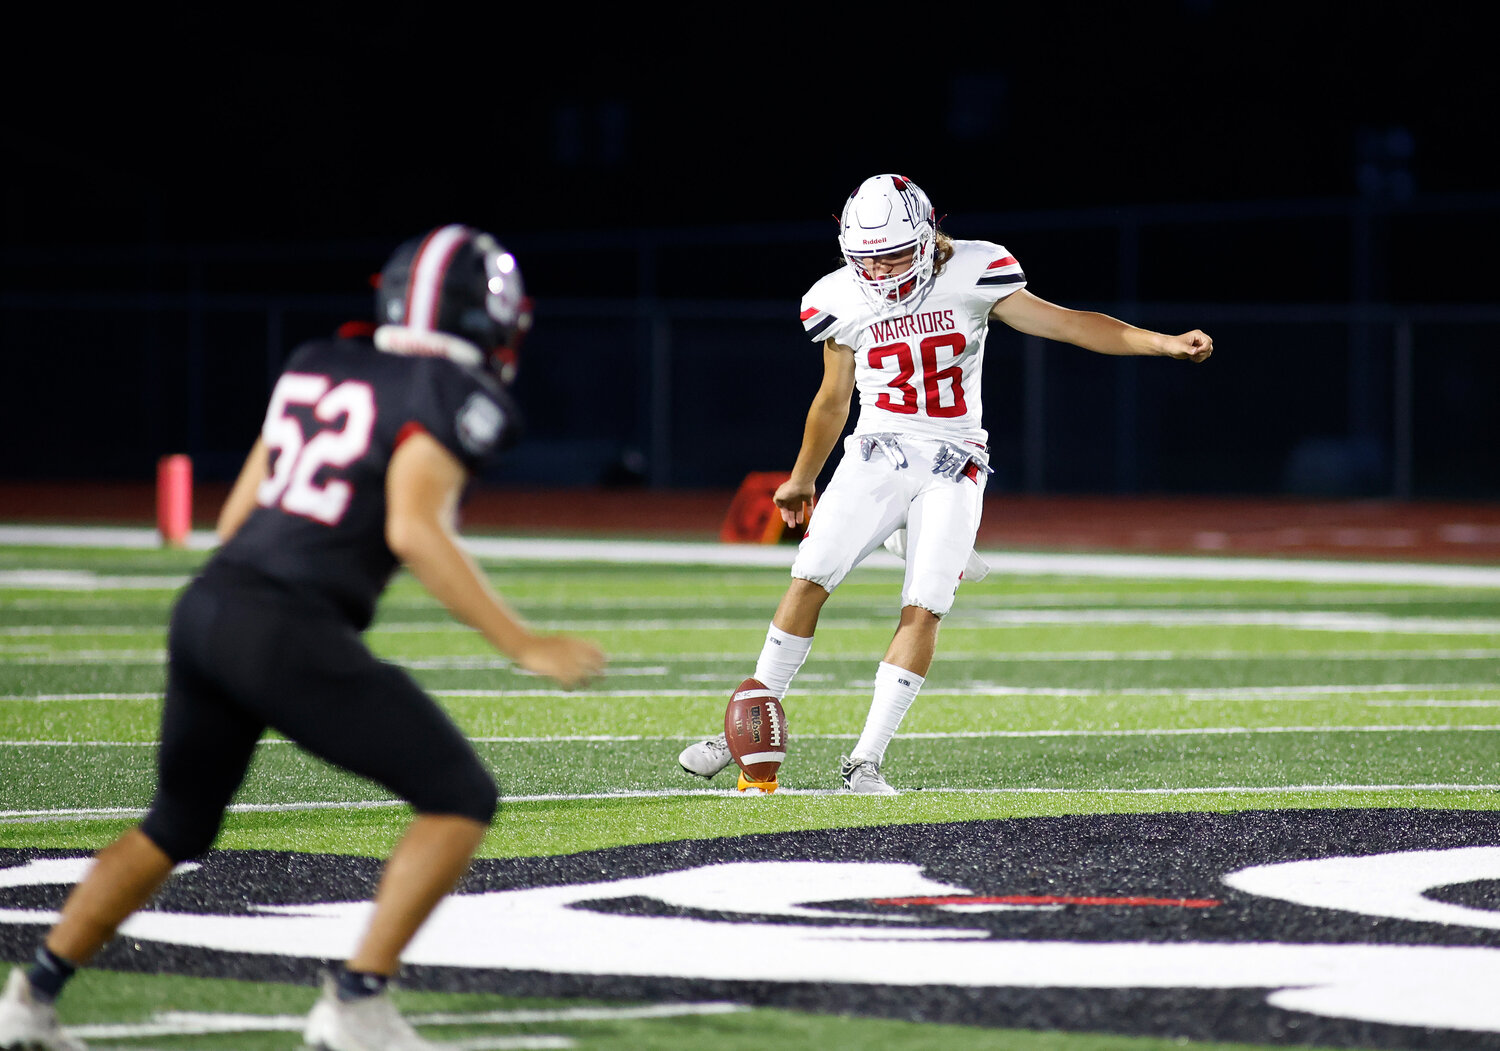 Warrenton's Tyler Faerber (36) kicks off during a game against Fort Zumwalt South, Friday, Aug. 25, 2023, at Fort Zumwalt South High School in St. Peters, Mo.